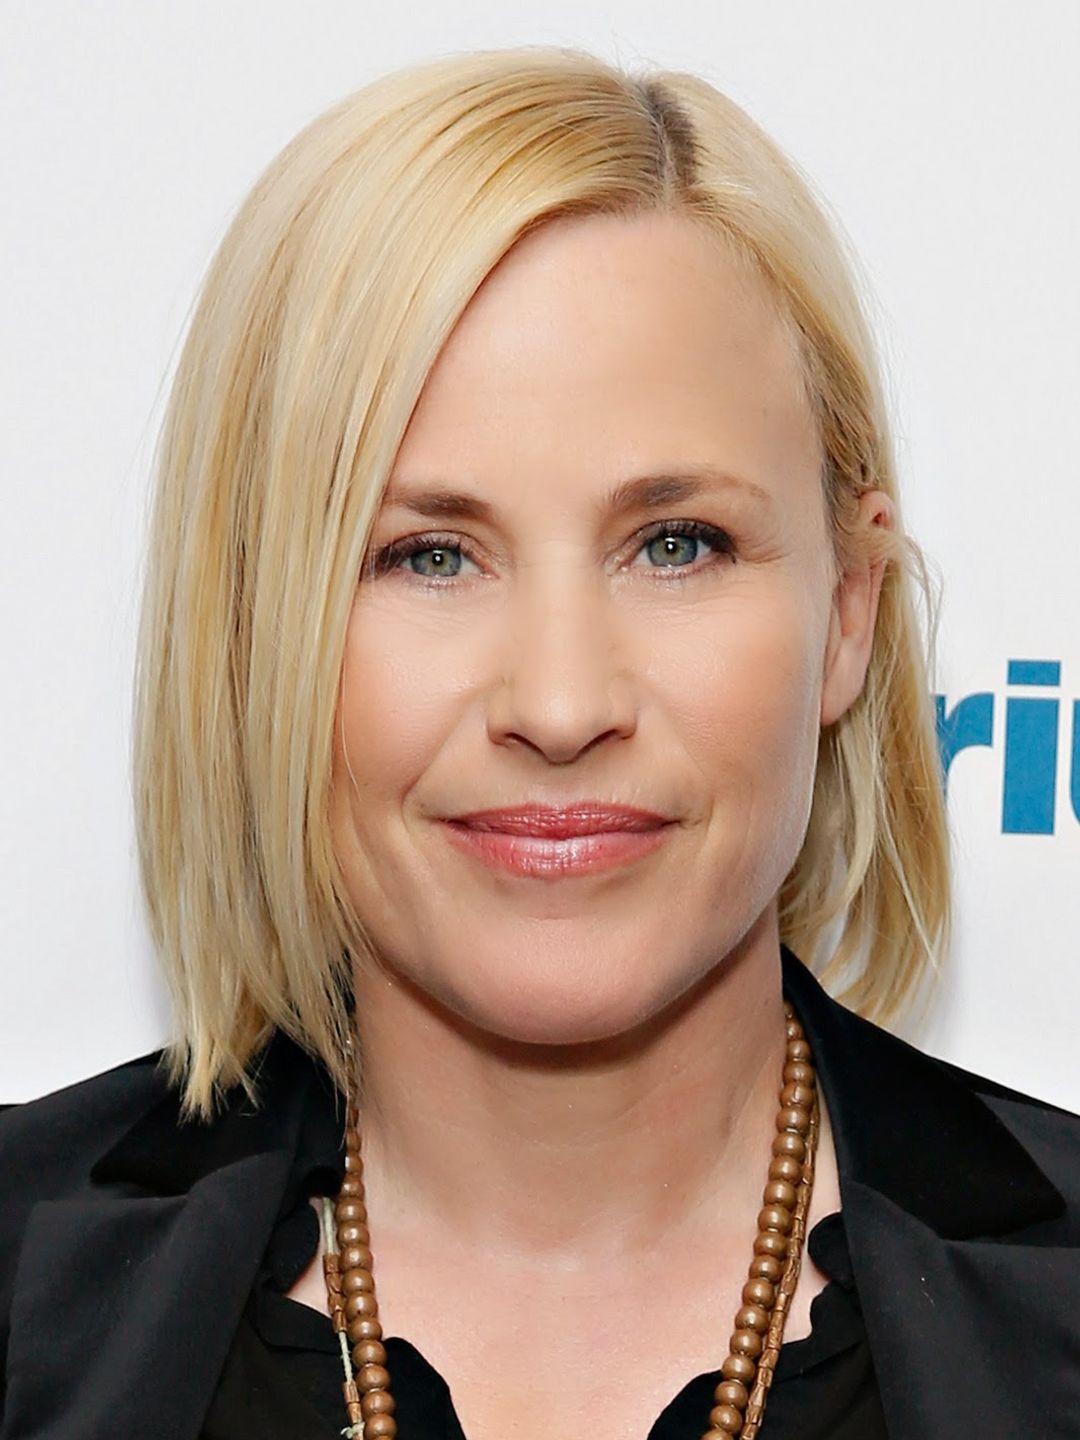 Patricia Arquette who are her parents